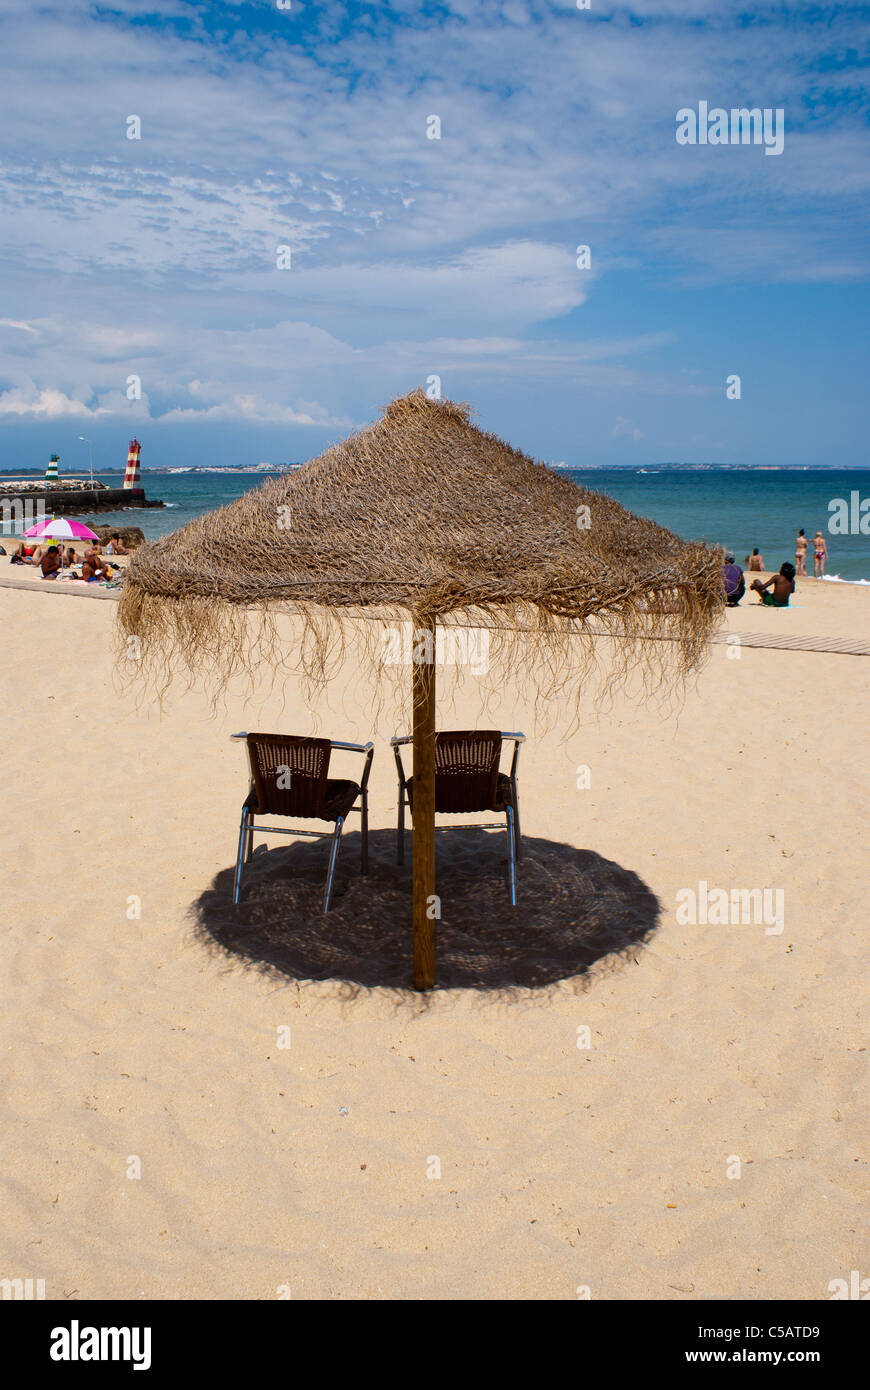 Parasol on a beach in Lagos, Portugal Stock Photo - Alamy